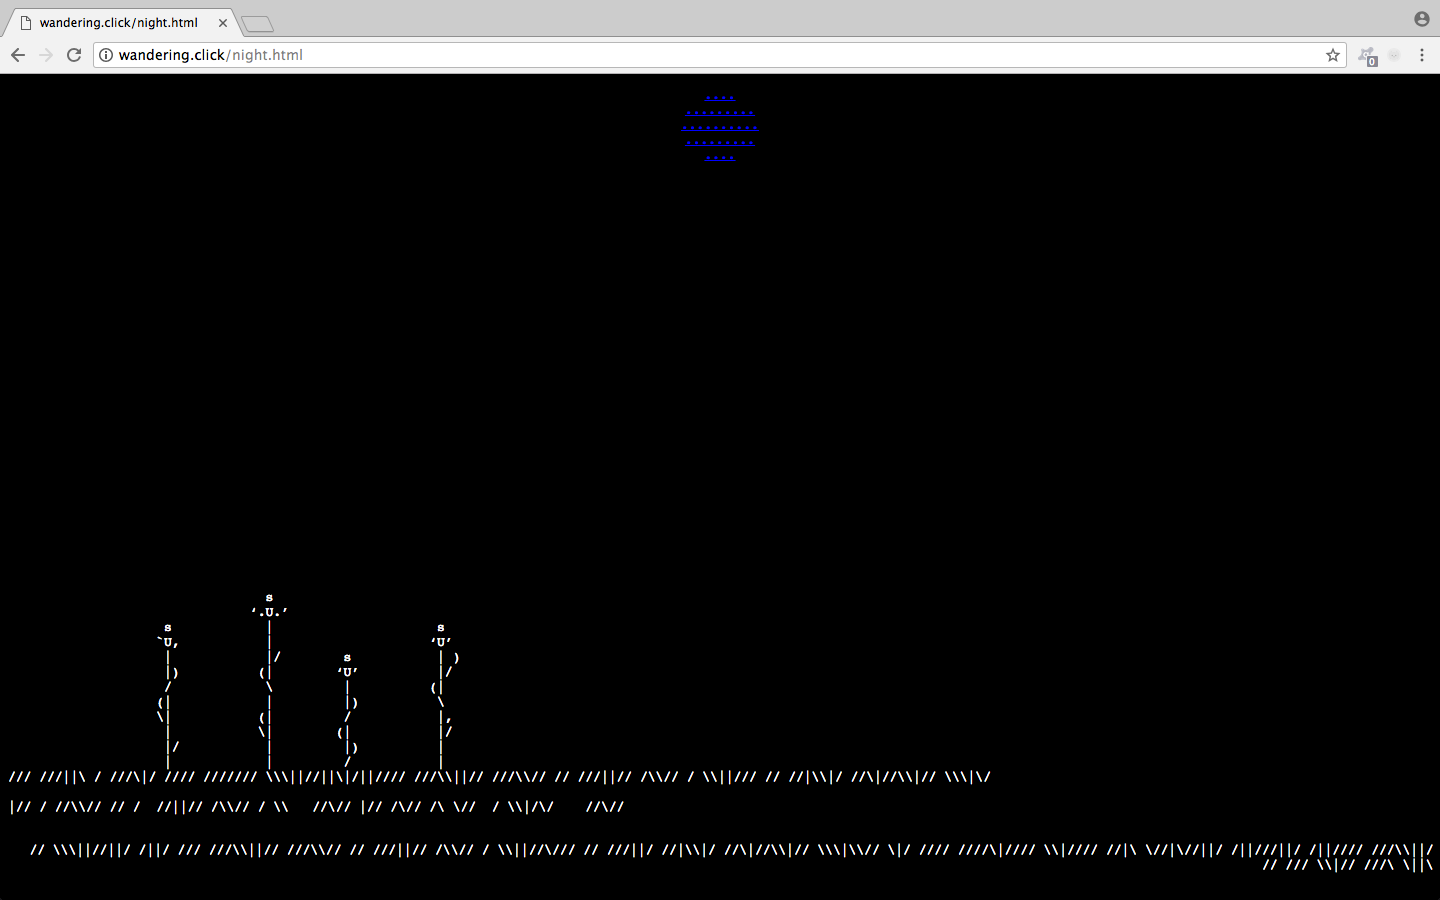 Screenshot of white ASCII flowers growing out of lines of grass on a black background